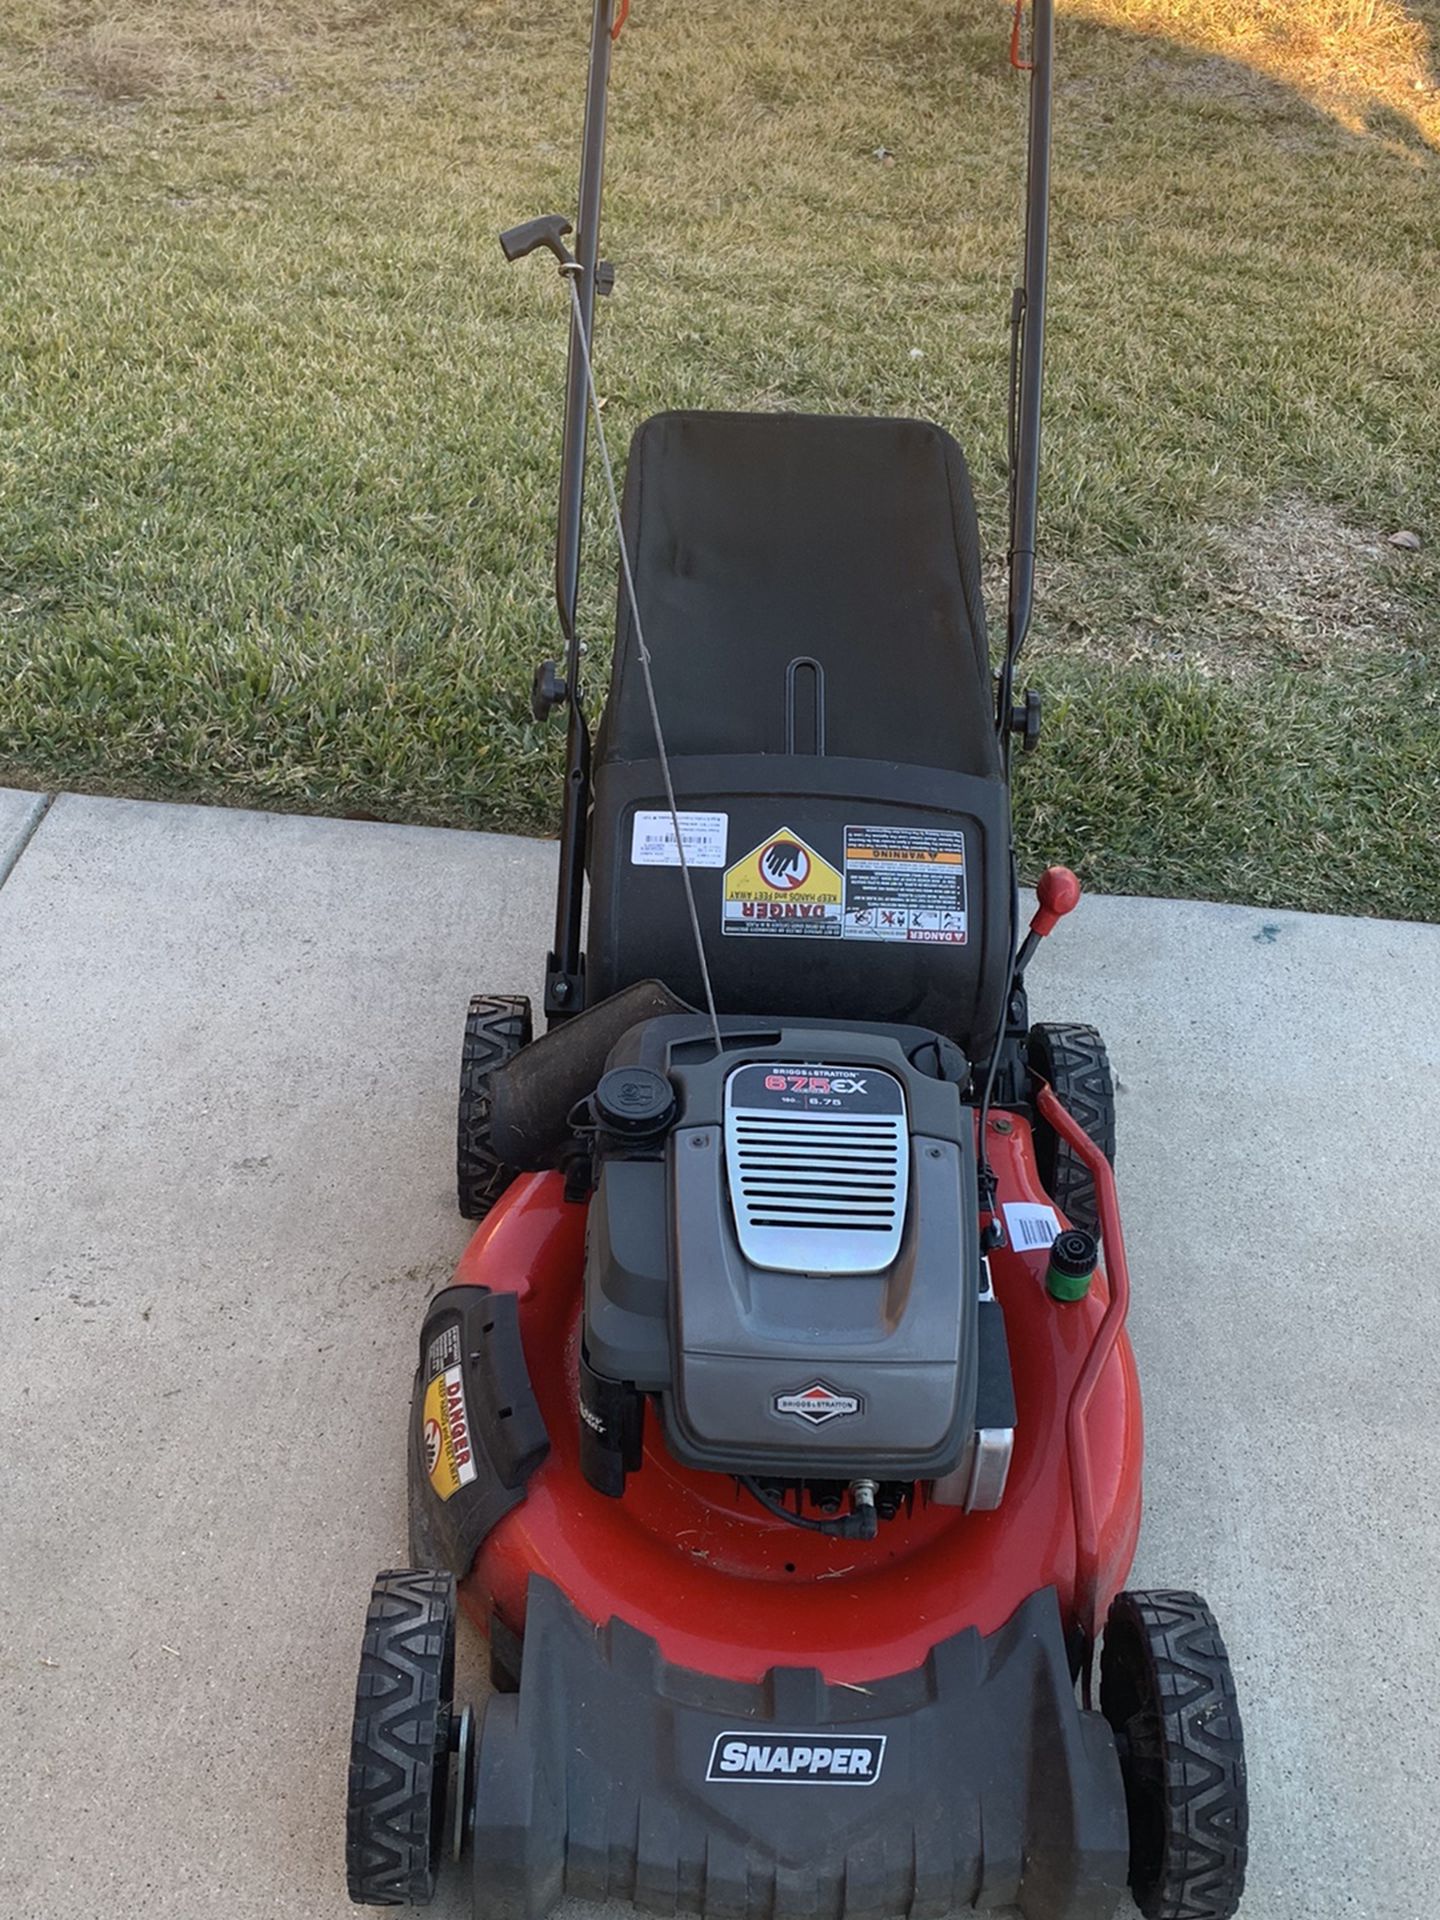 Snapper 675EX lawnmower and TB 6044 weed eater